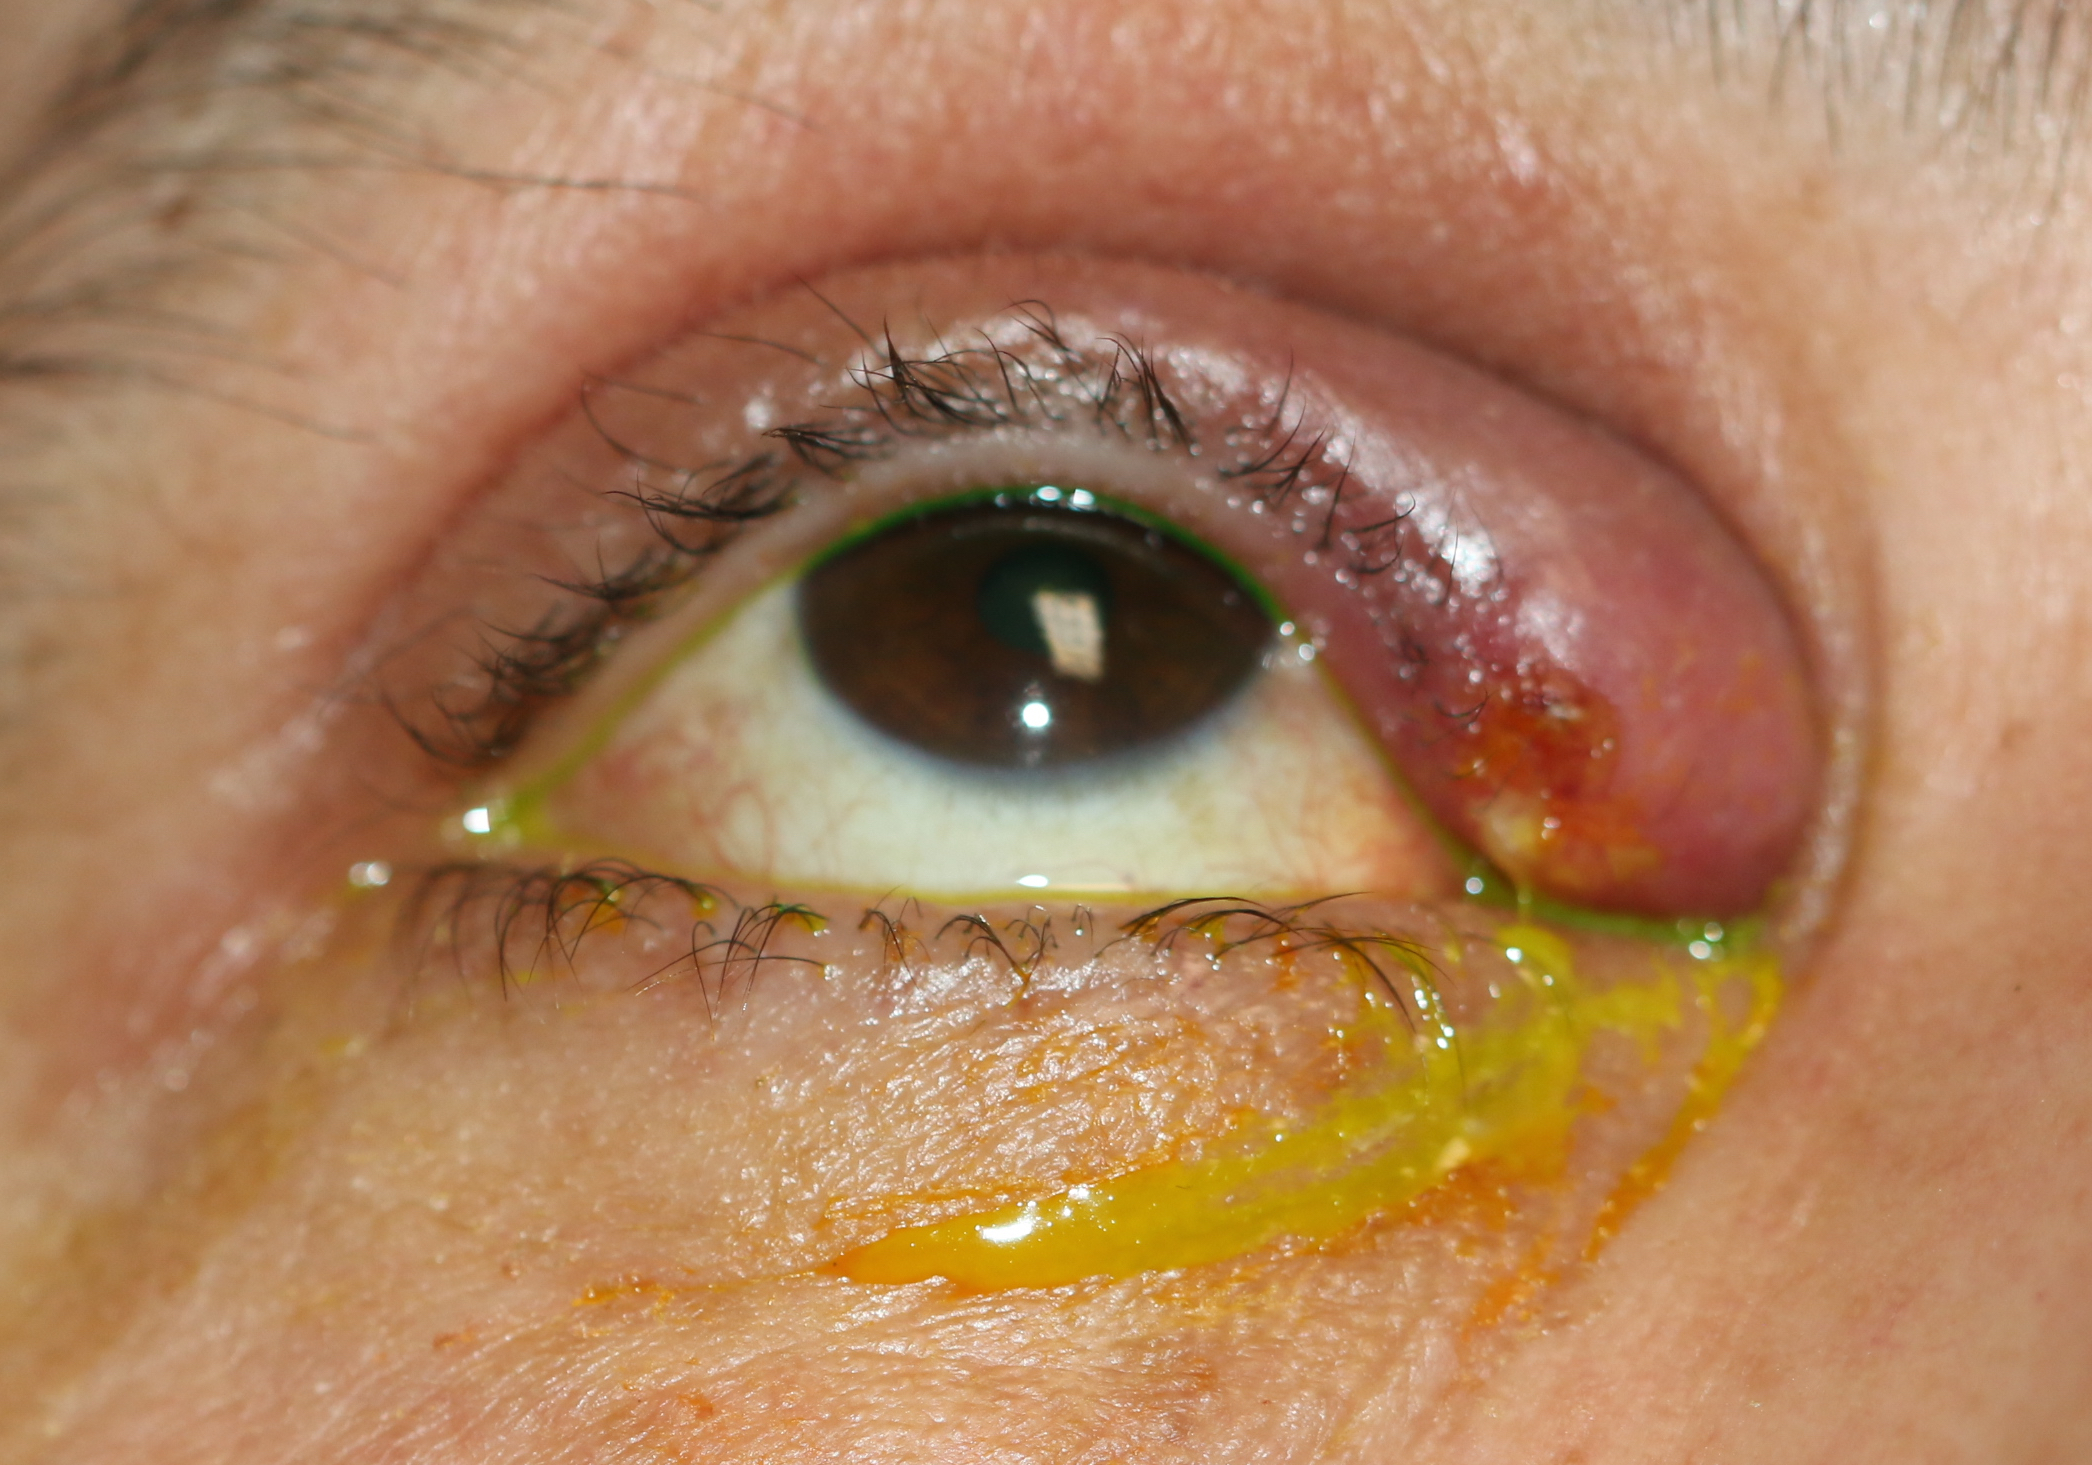 Upper canaliculitis with swelling of the medial upper eyelid, mucoid discharge from the upper punctum and a history of previous placement of a Herrick intra-canalicular plug